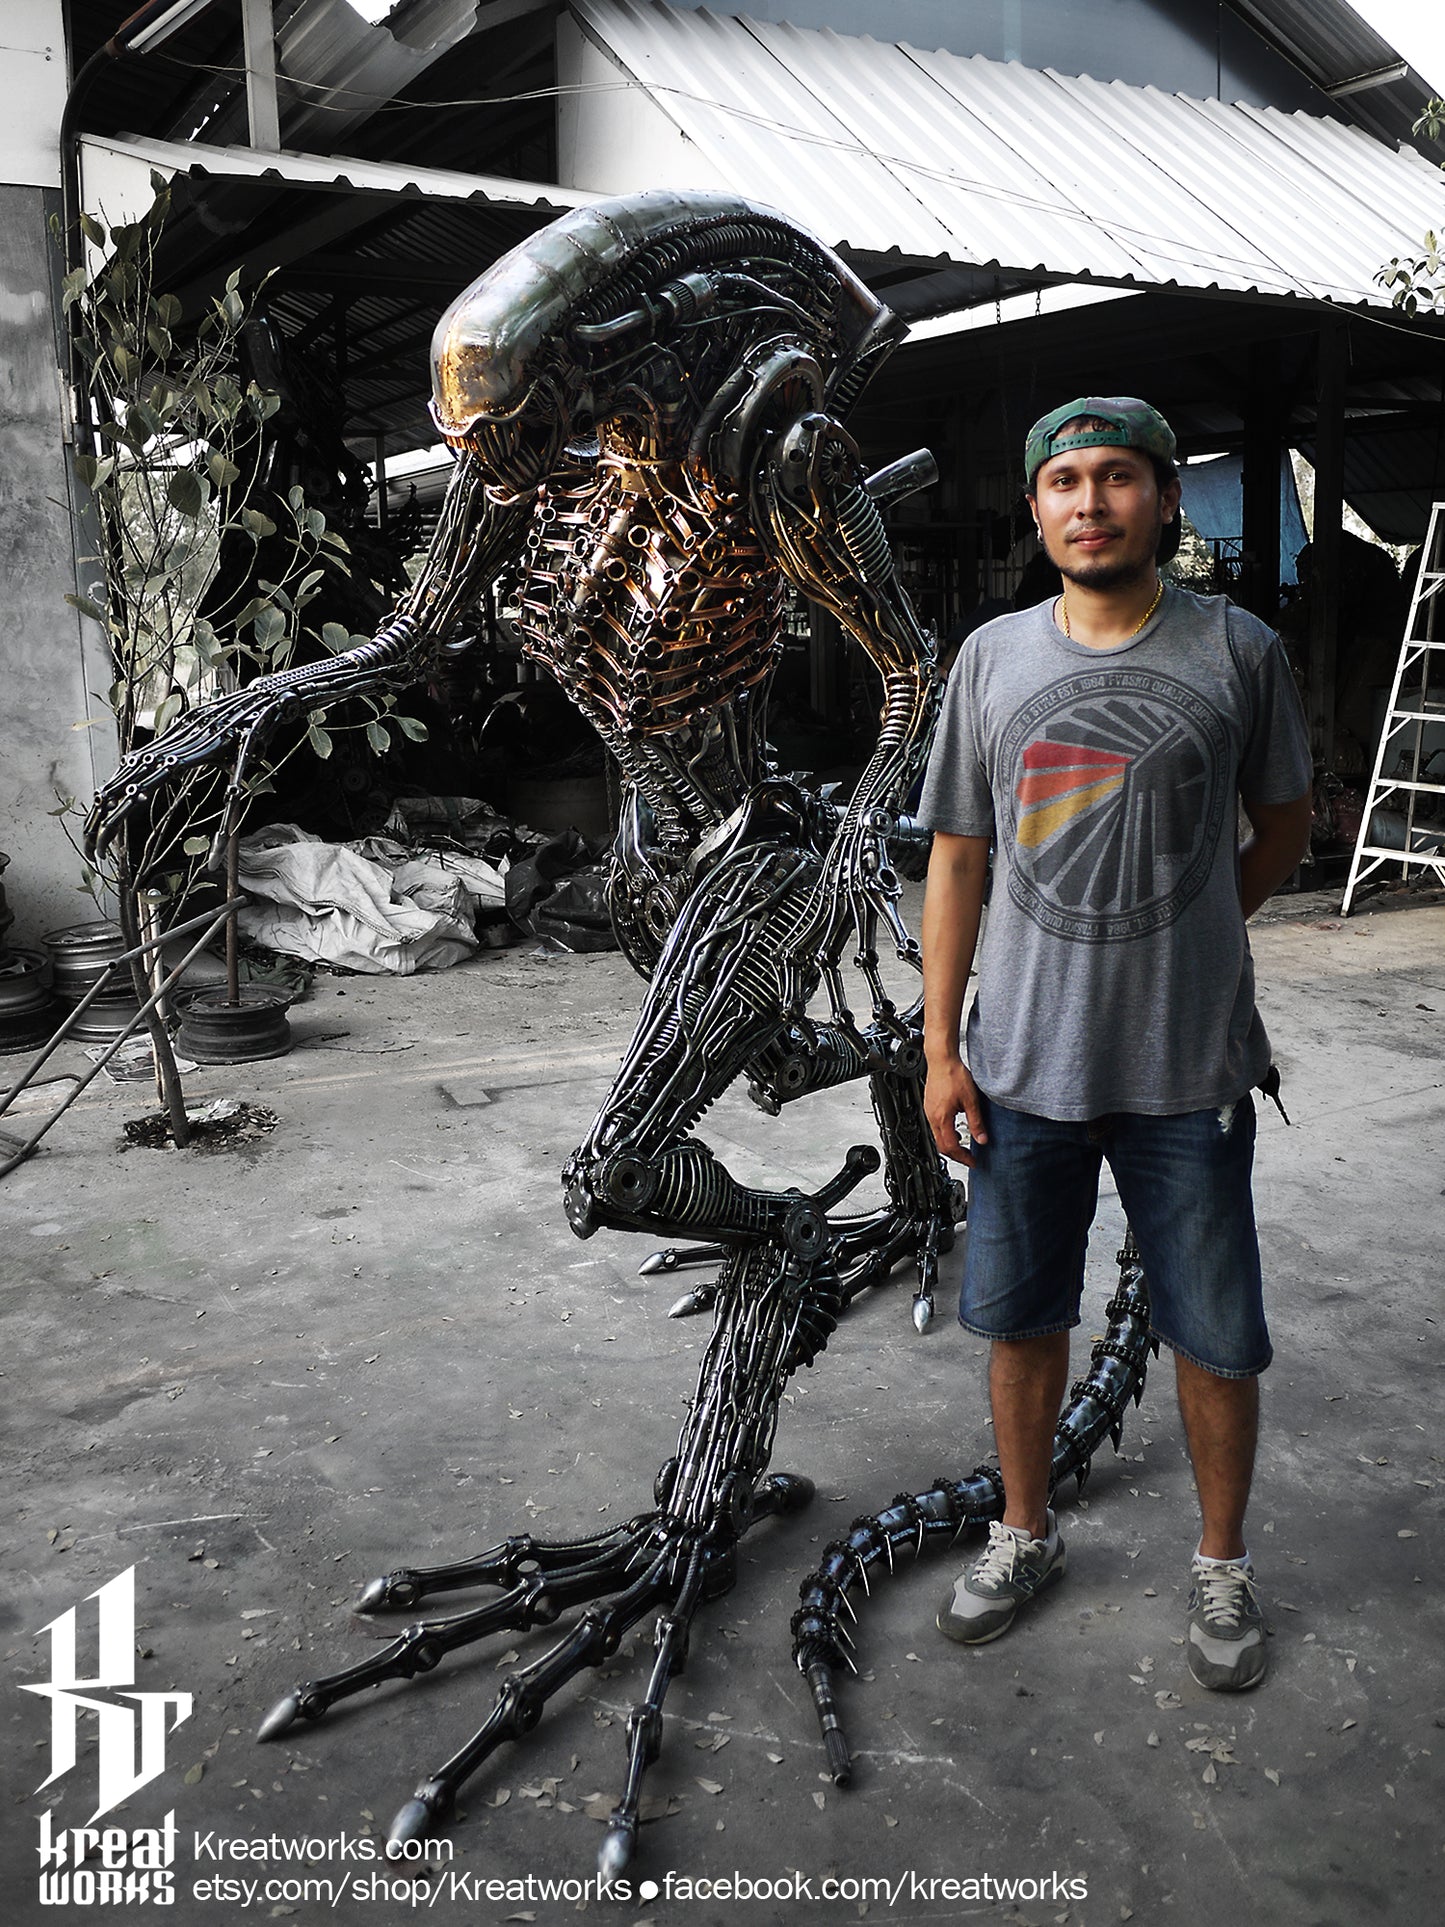 Recycled Metal Biomechanical Life-size Monster (made to order) / Recycle Metal Sustainable Sculpture Art